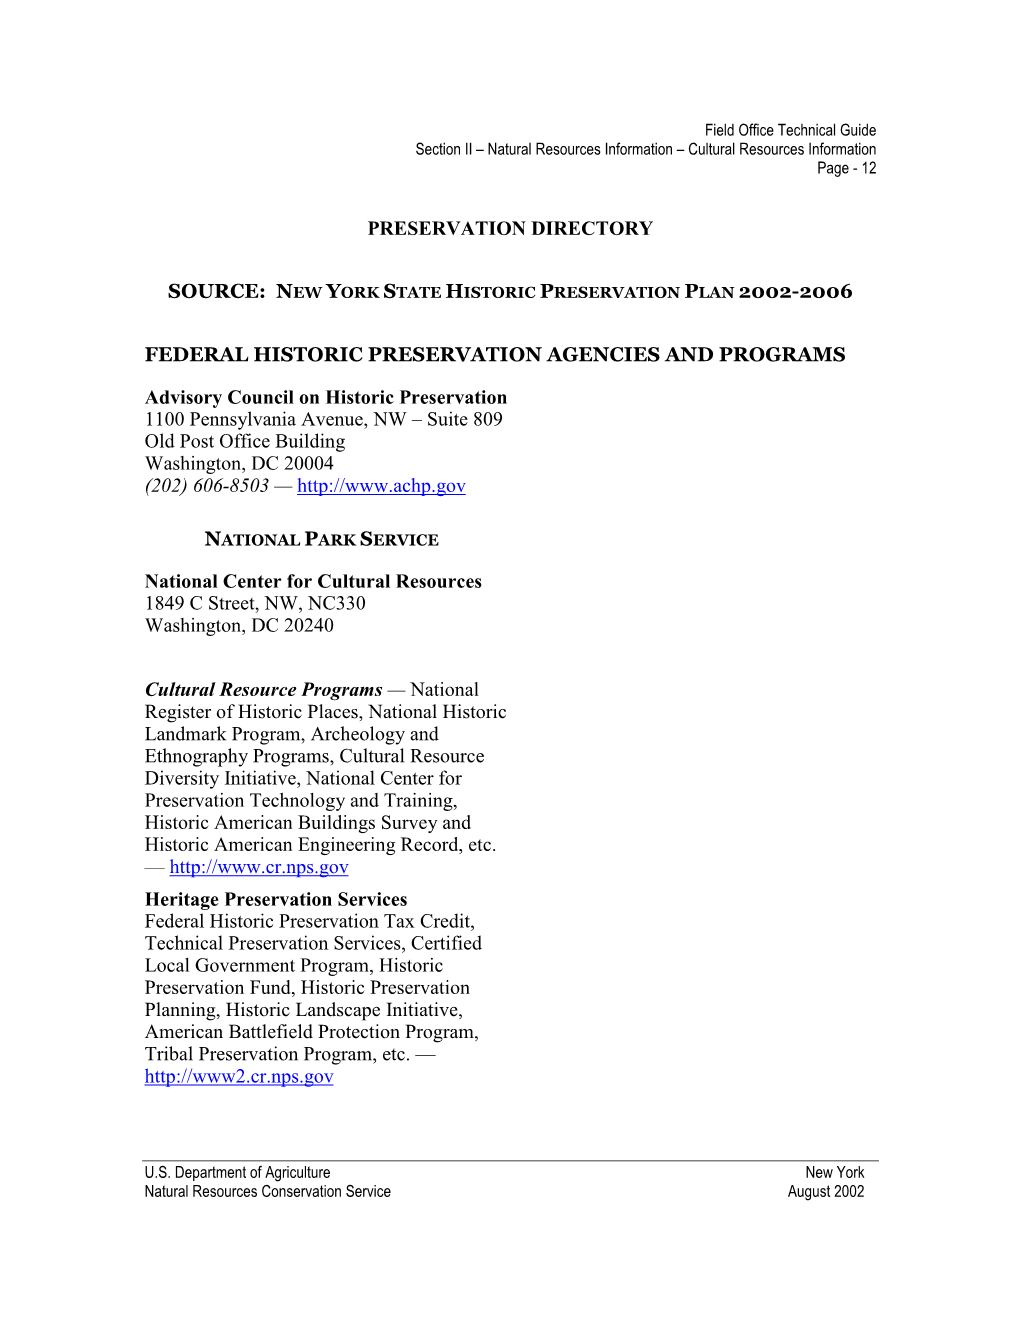 Preservation Directory Federal Historic